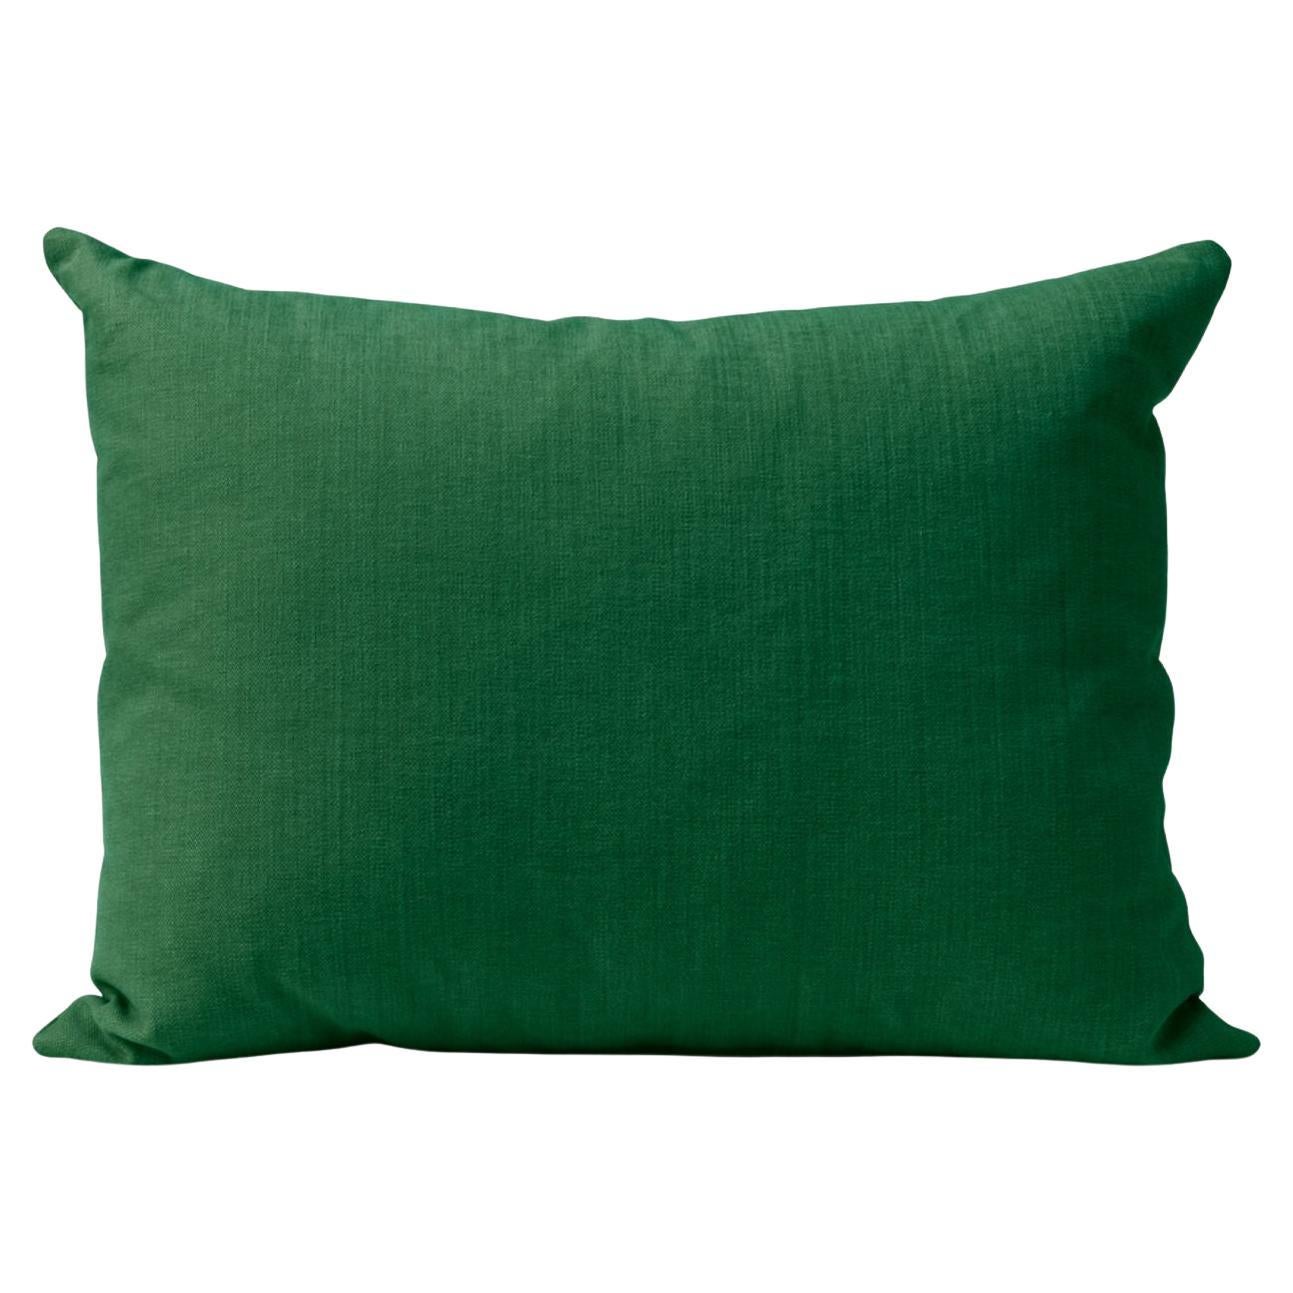 Galore Cushion Square Emerald by Warm Nordic For Sale